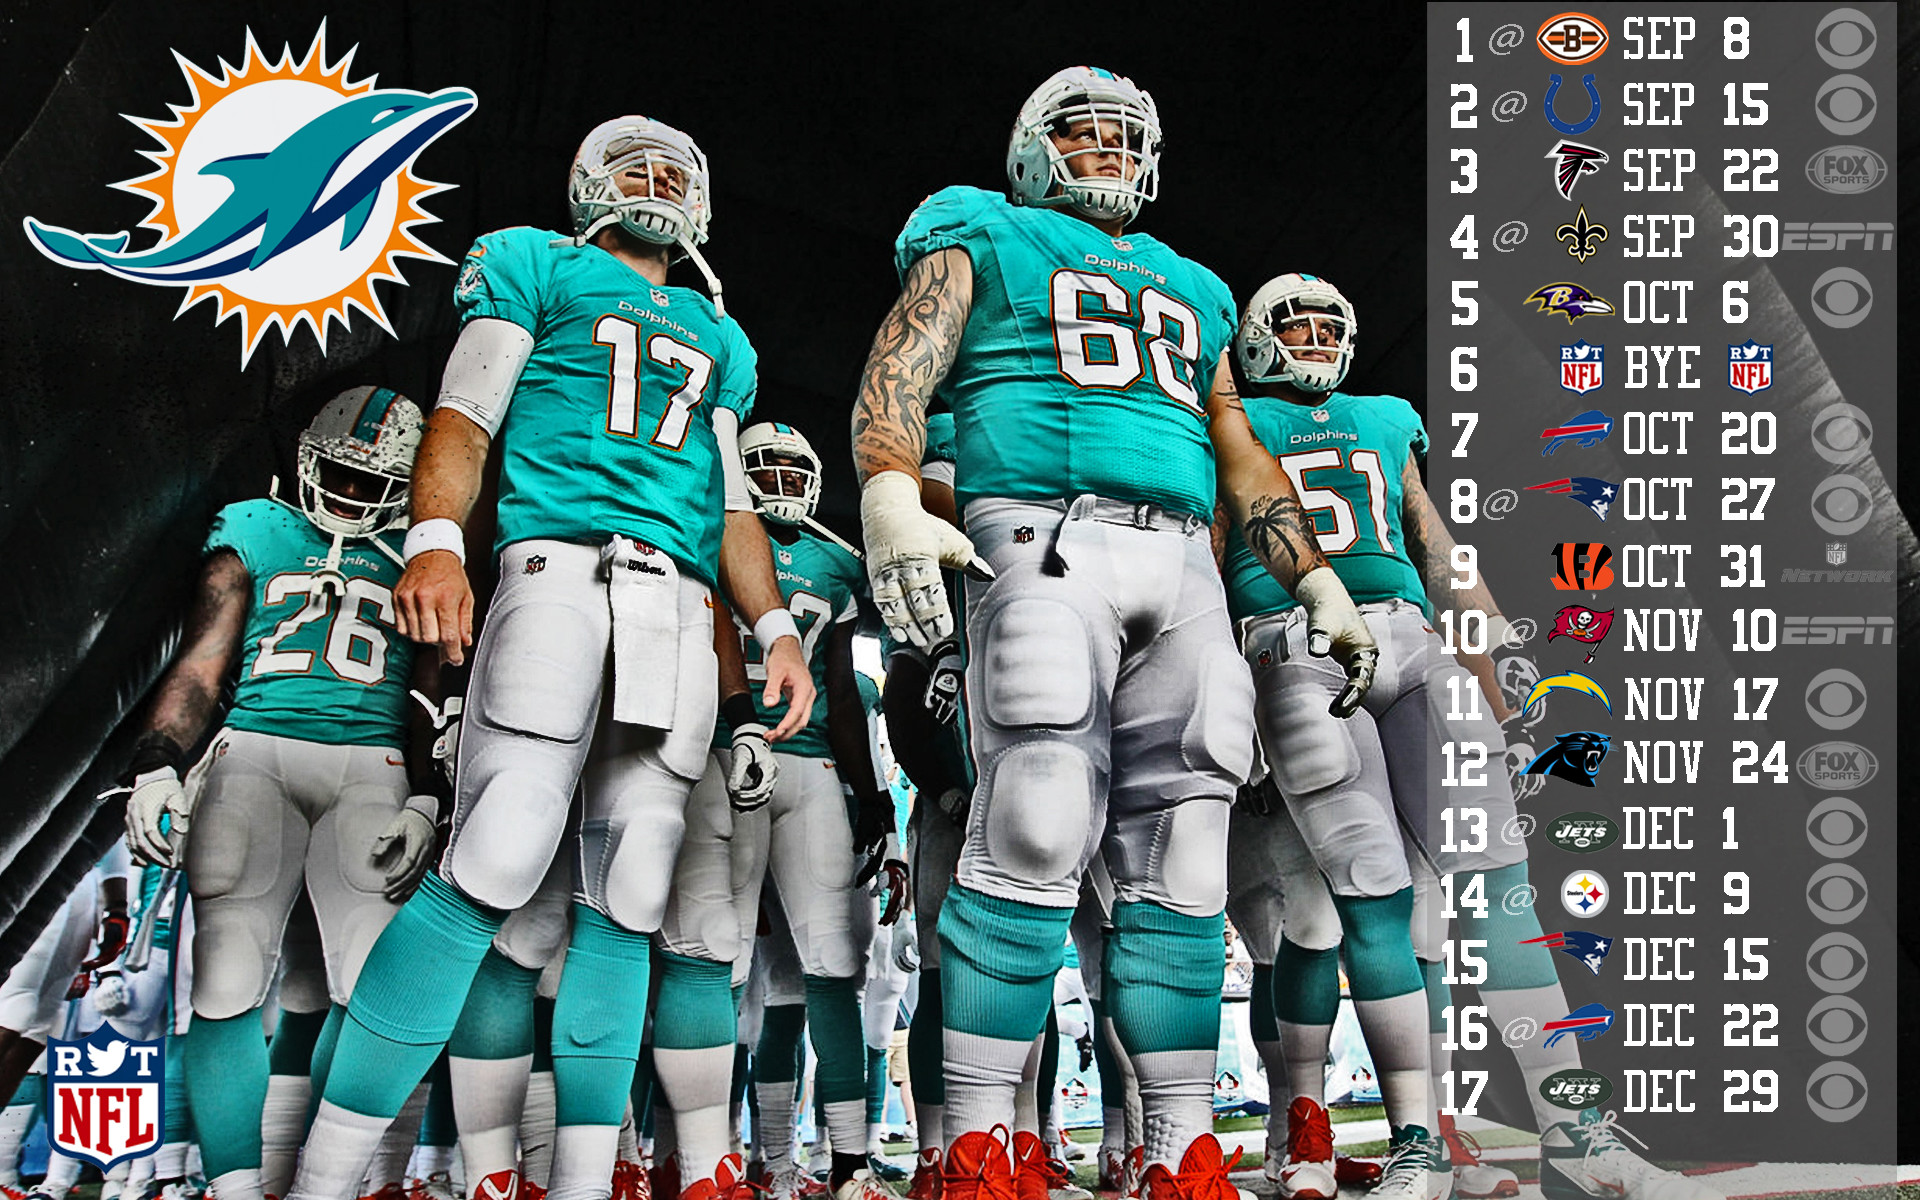 1920x1200 ... miami dolphins wallpapers hd page 3 of 3 wallpaper wiki ...